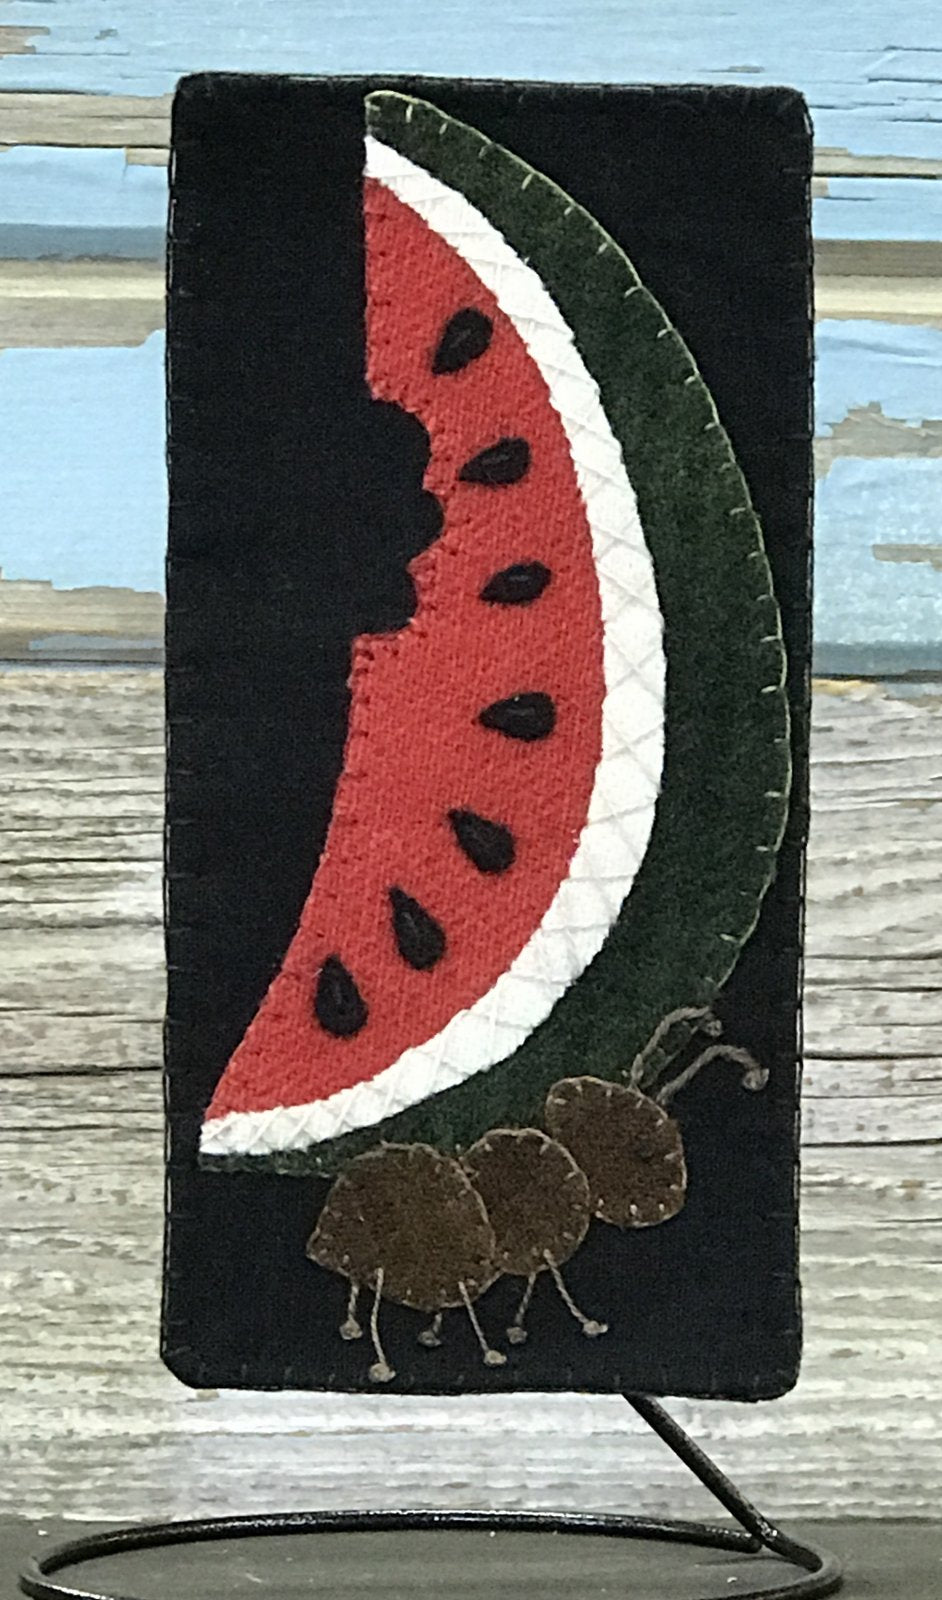 Watermelon Wool Kit by Front Porch Quilts